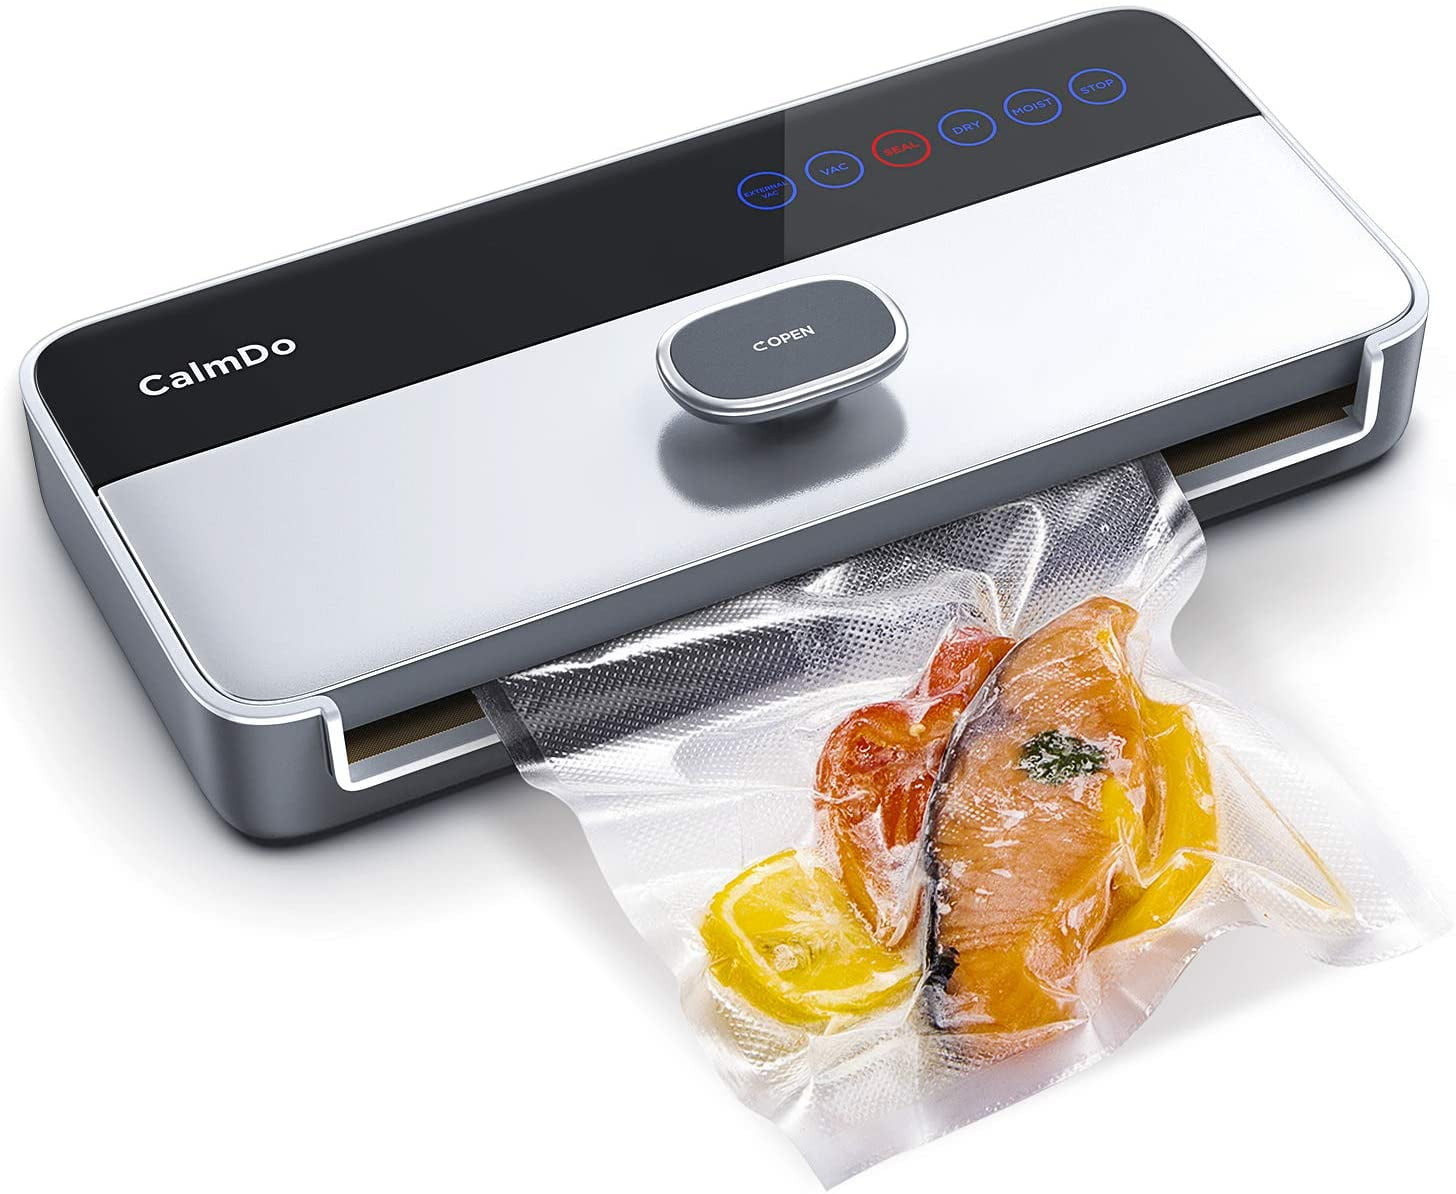 CalmDo Vacuum Sealer Machine, Food Vacuum Air Sealing System with Full  Automatic Bag Sealing Technology for Food Saver Storage, CD-V001